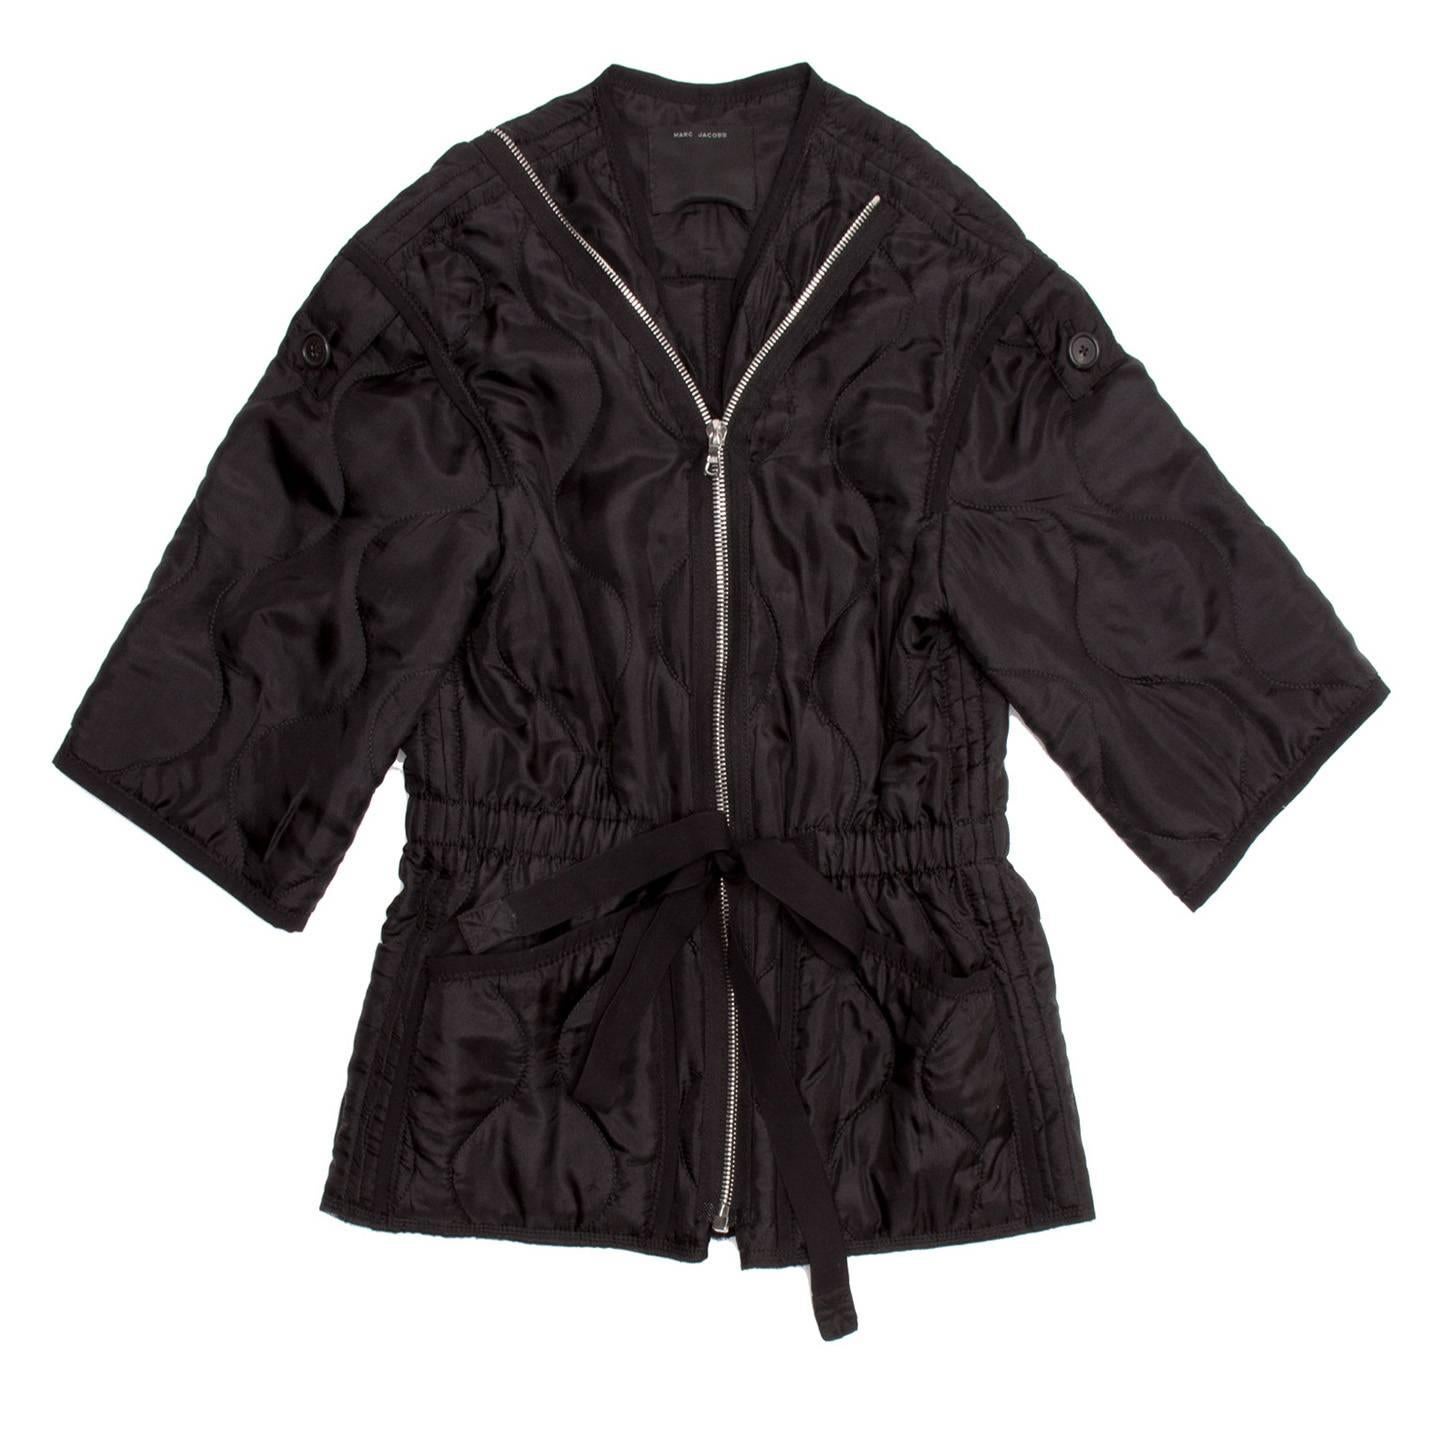 Black quilted jacket with cinched tie waist and 3/4 kimono sleeves. The Jacket is collarless and has two fastening systems: with two rows of buttons or with two zippers. The same black ribbon of the cinched tie waist adorns neck, patch pockets,